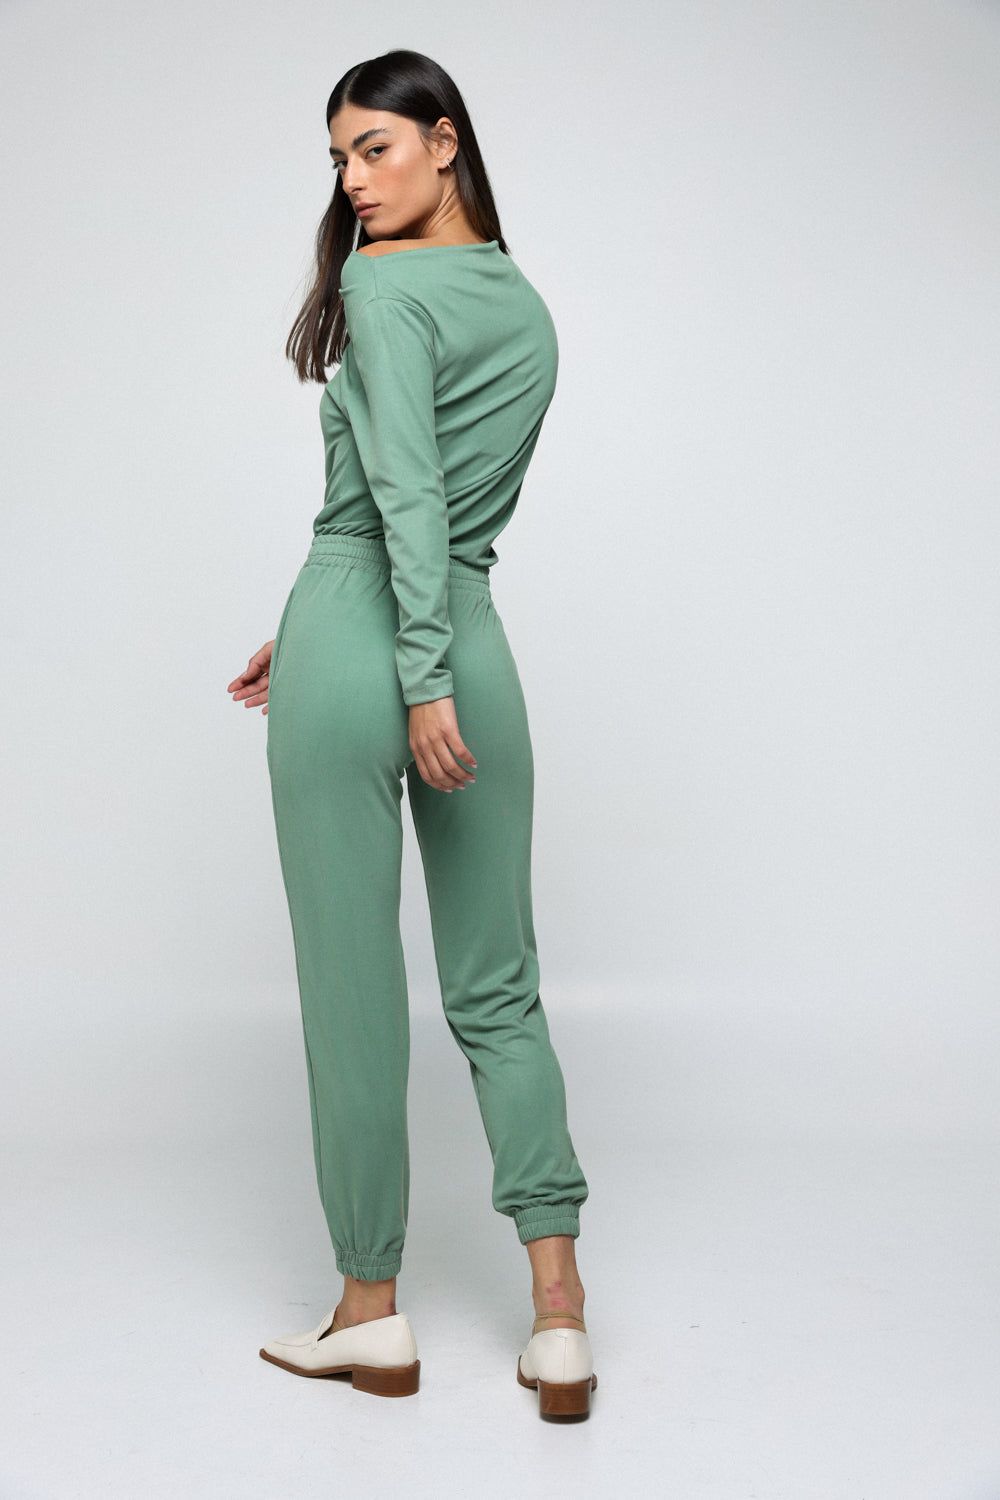 BFF Long Green Jumpsuit